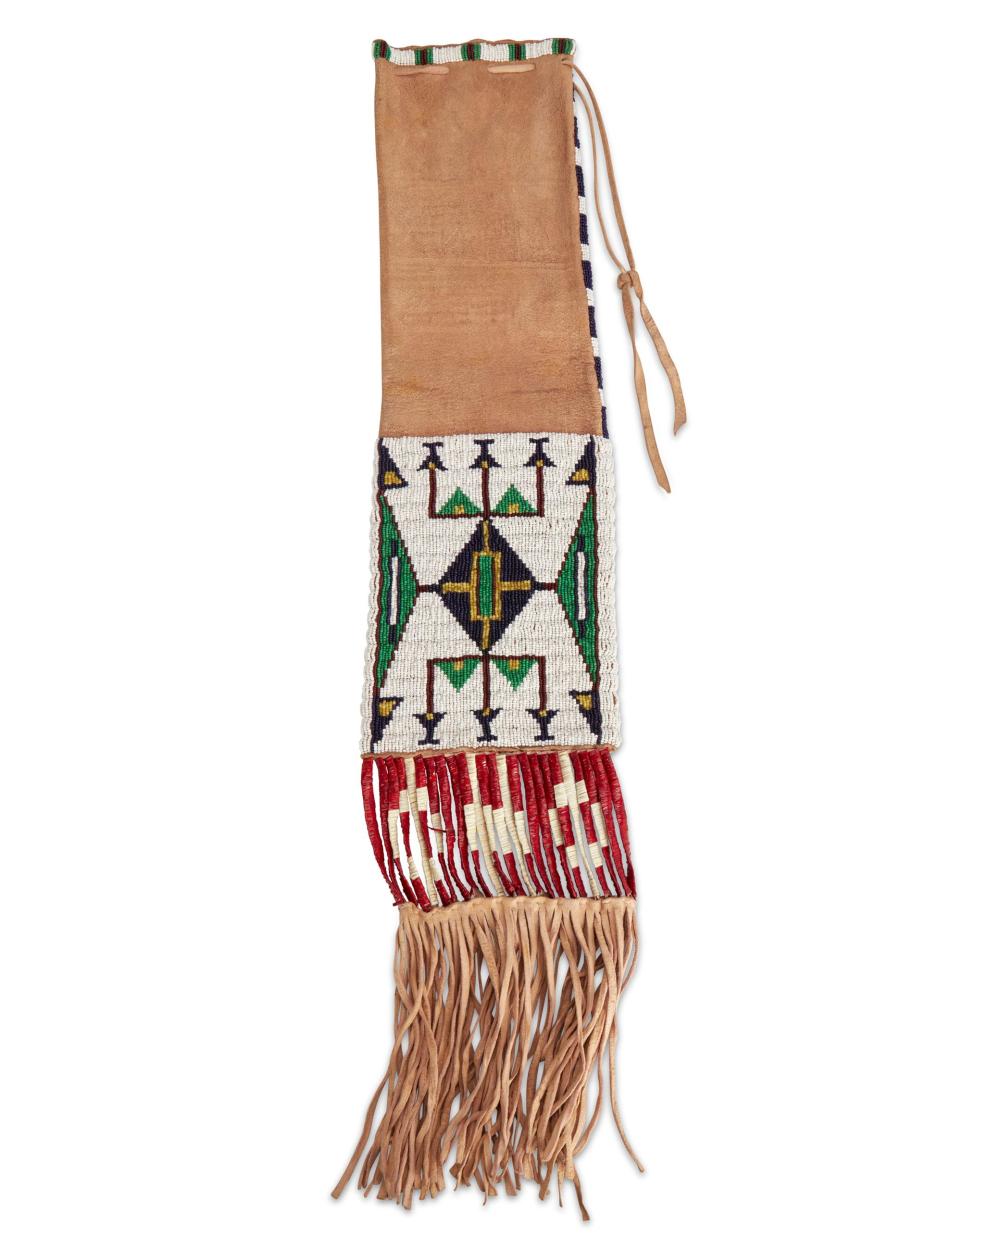 A PLAINS BEADED AND QUILLED TOBACCO